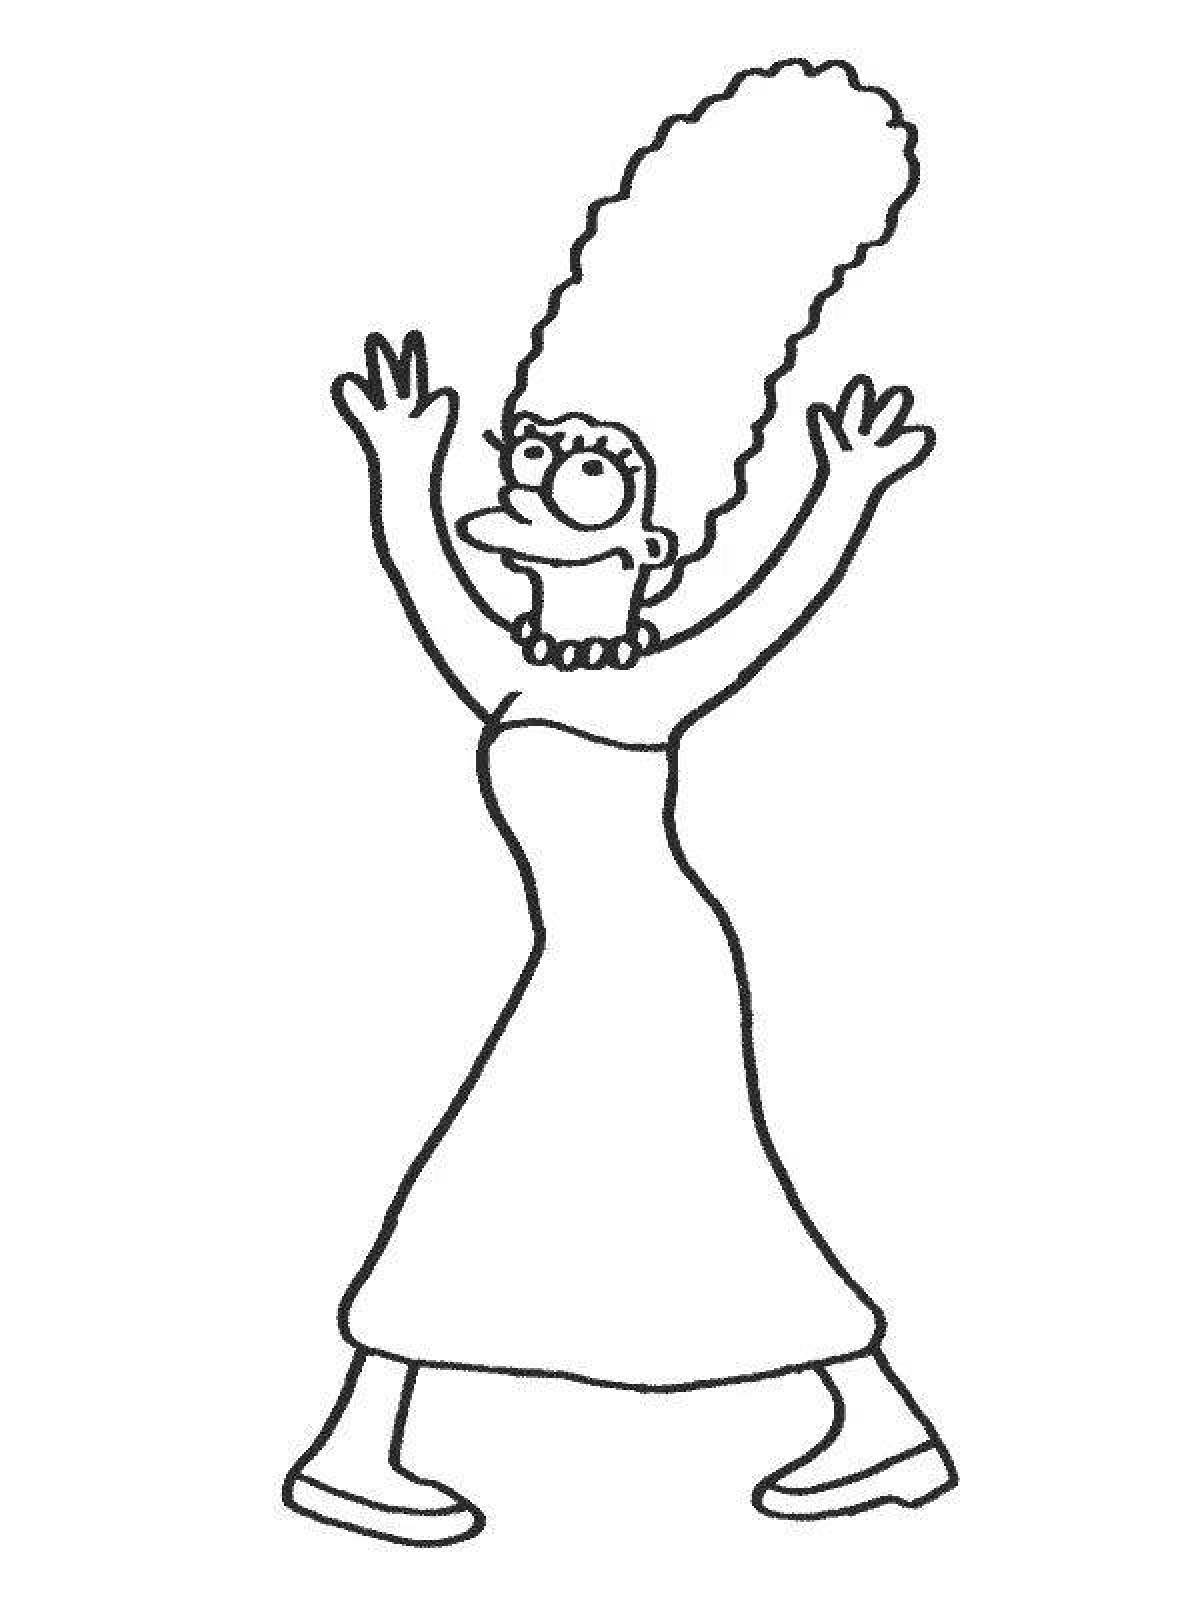 Marge simpson attraction coloring book